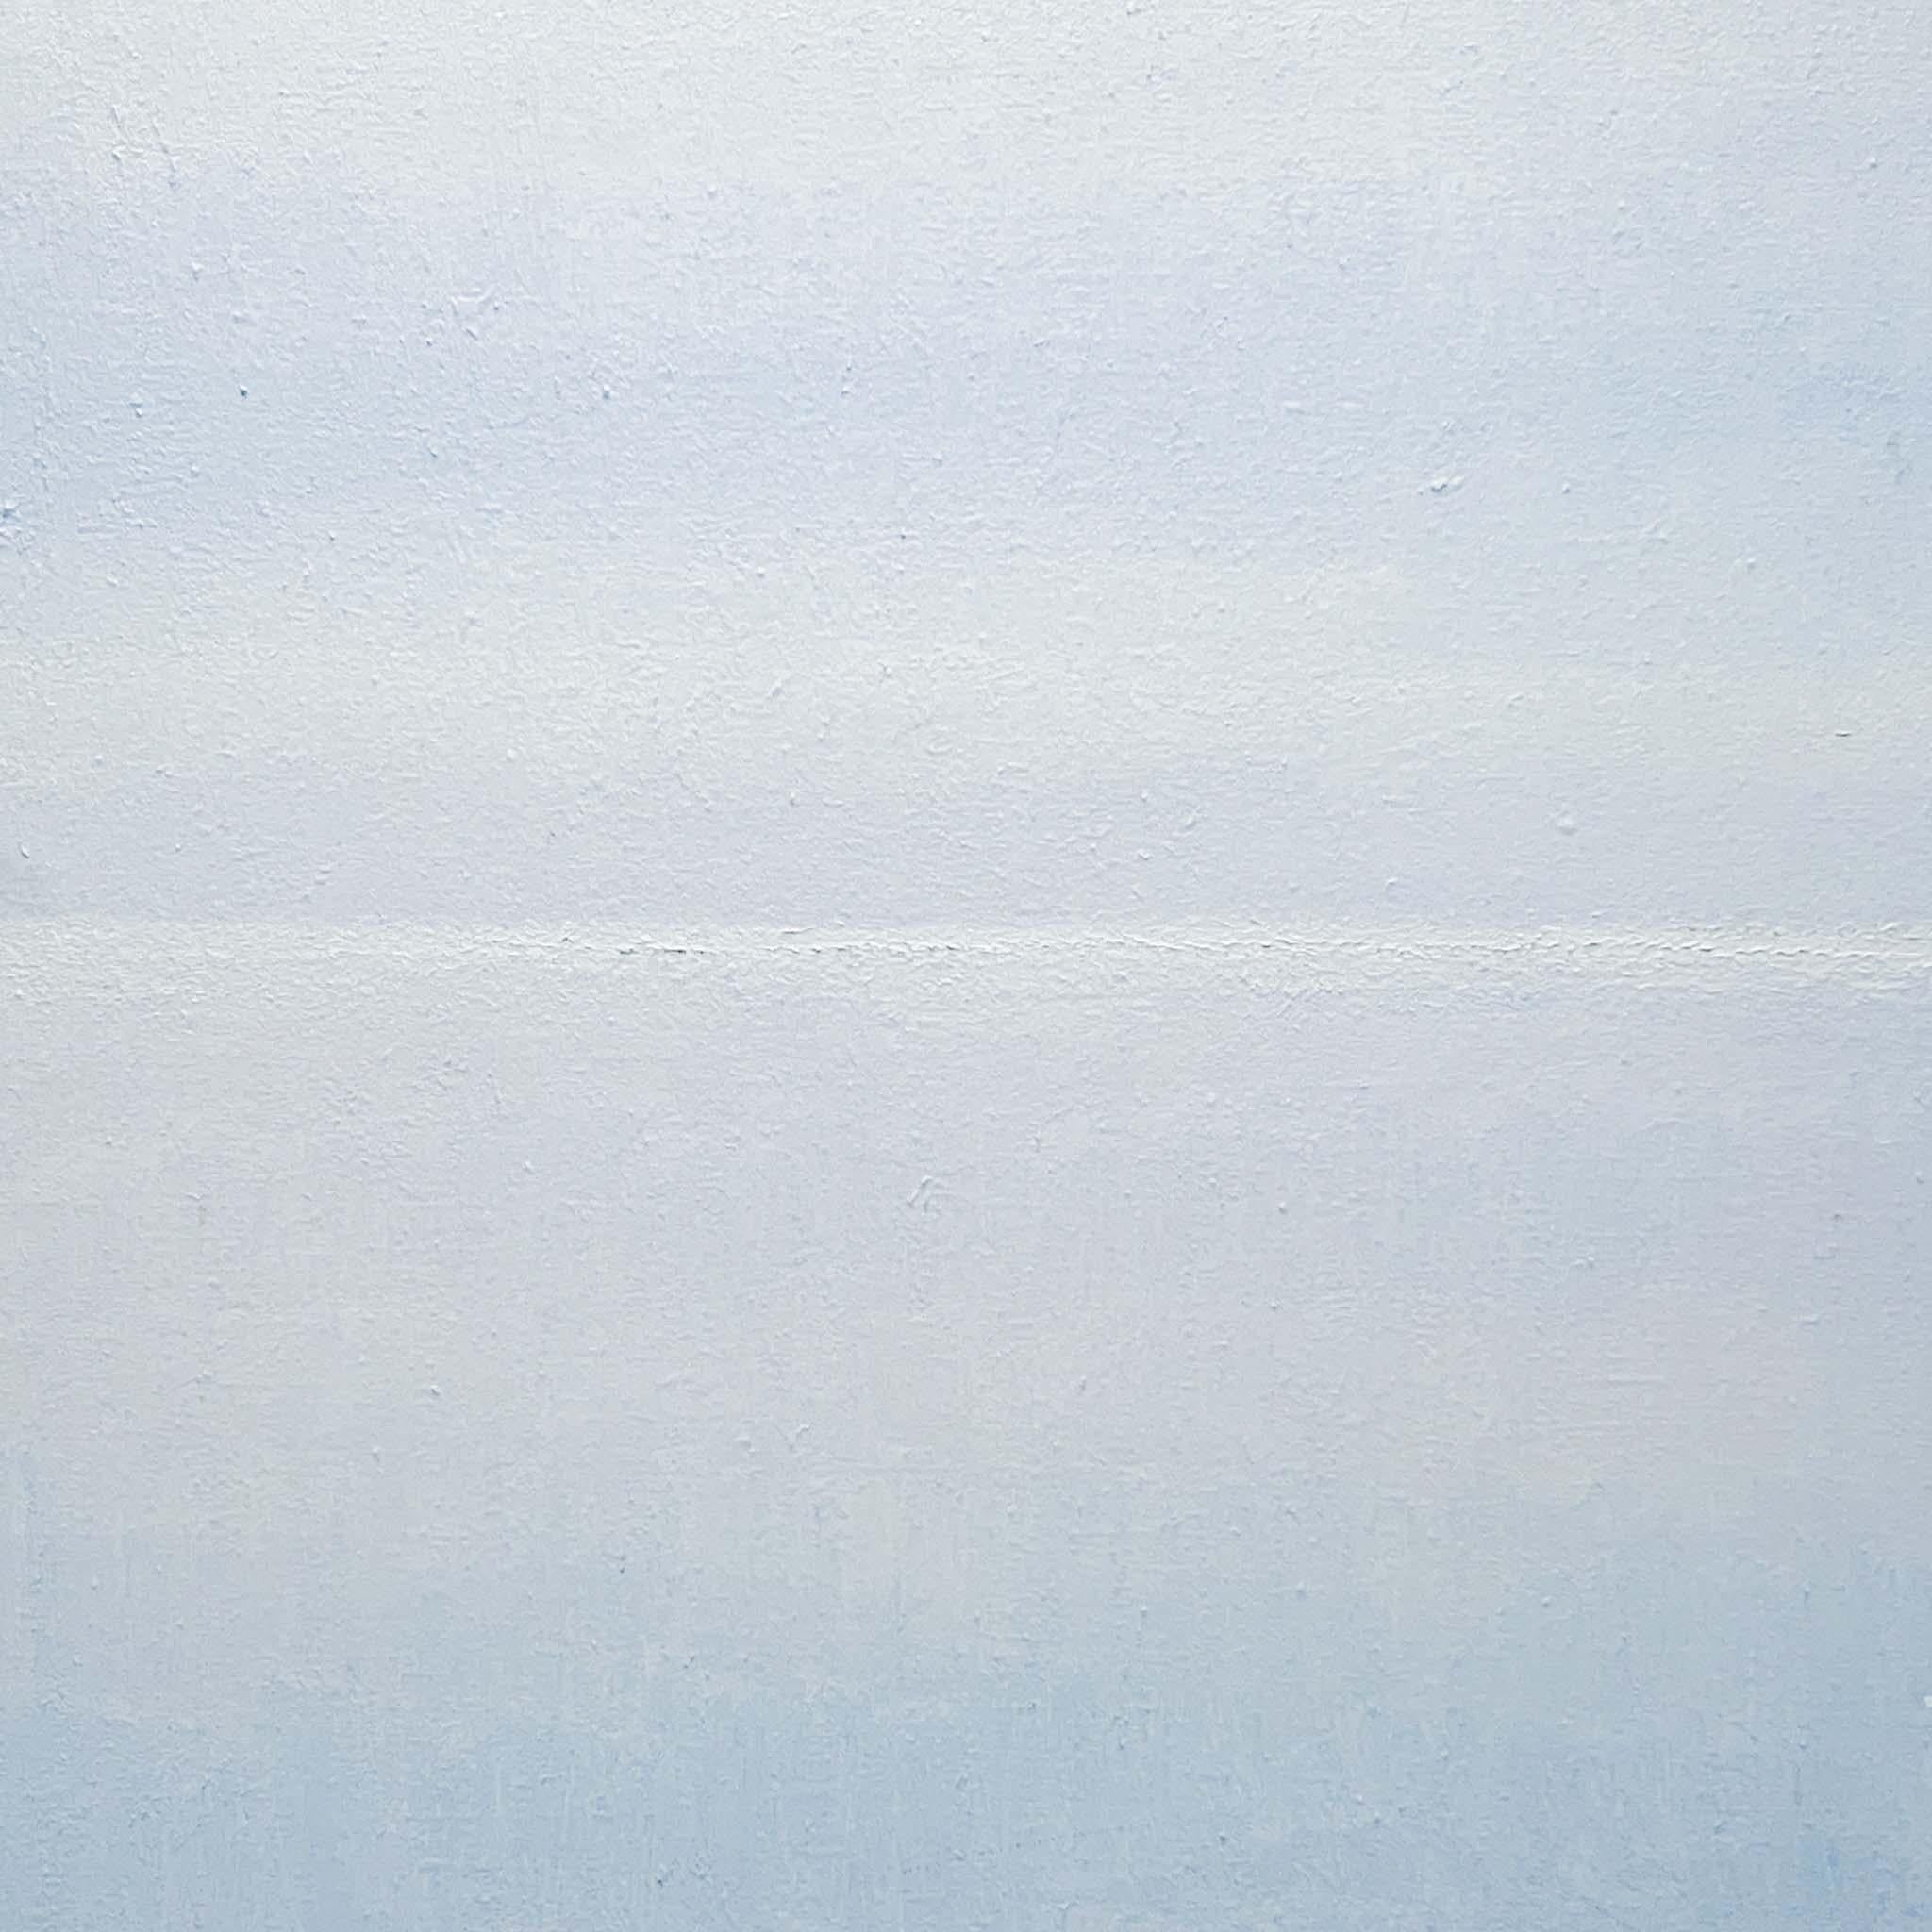 Rudi Polder Abstract Landschap, Luminist Painting, 1980s Blue Tones In Fair Condition For Sale In AMSTERDAM, NL